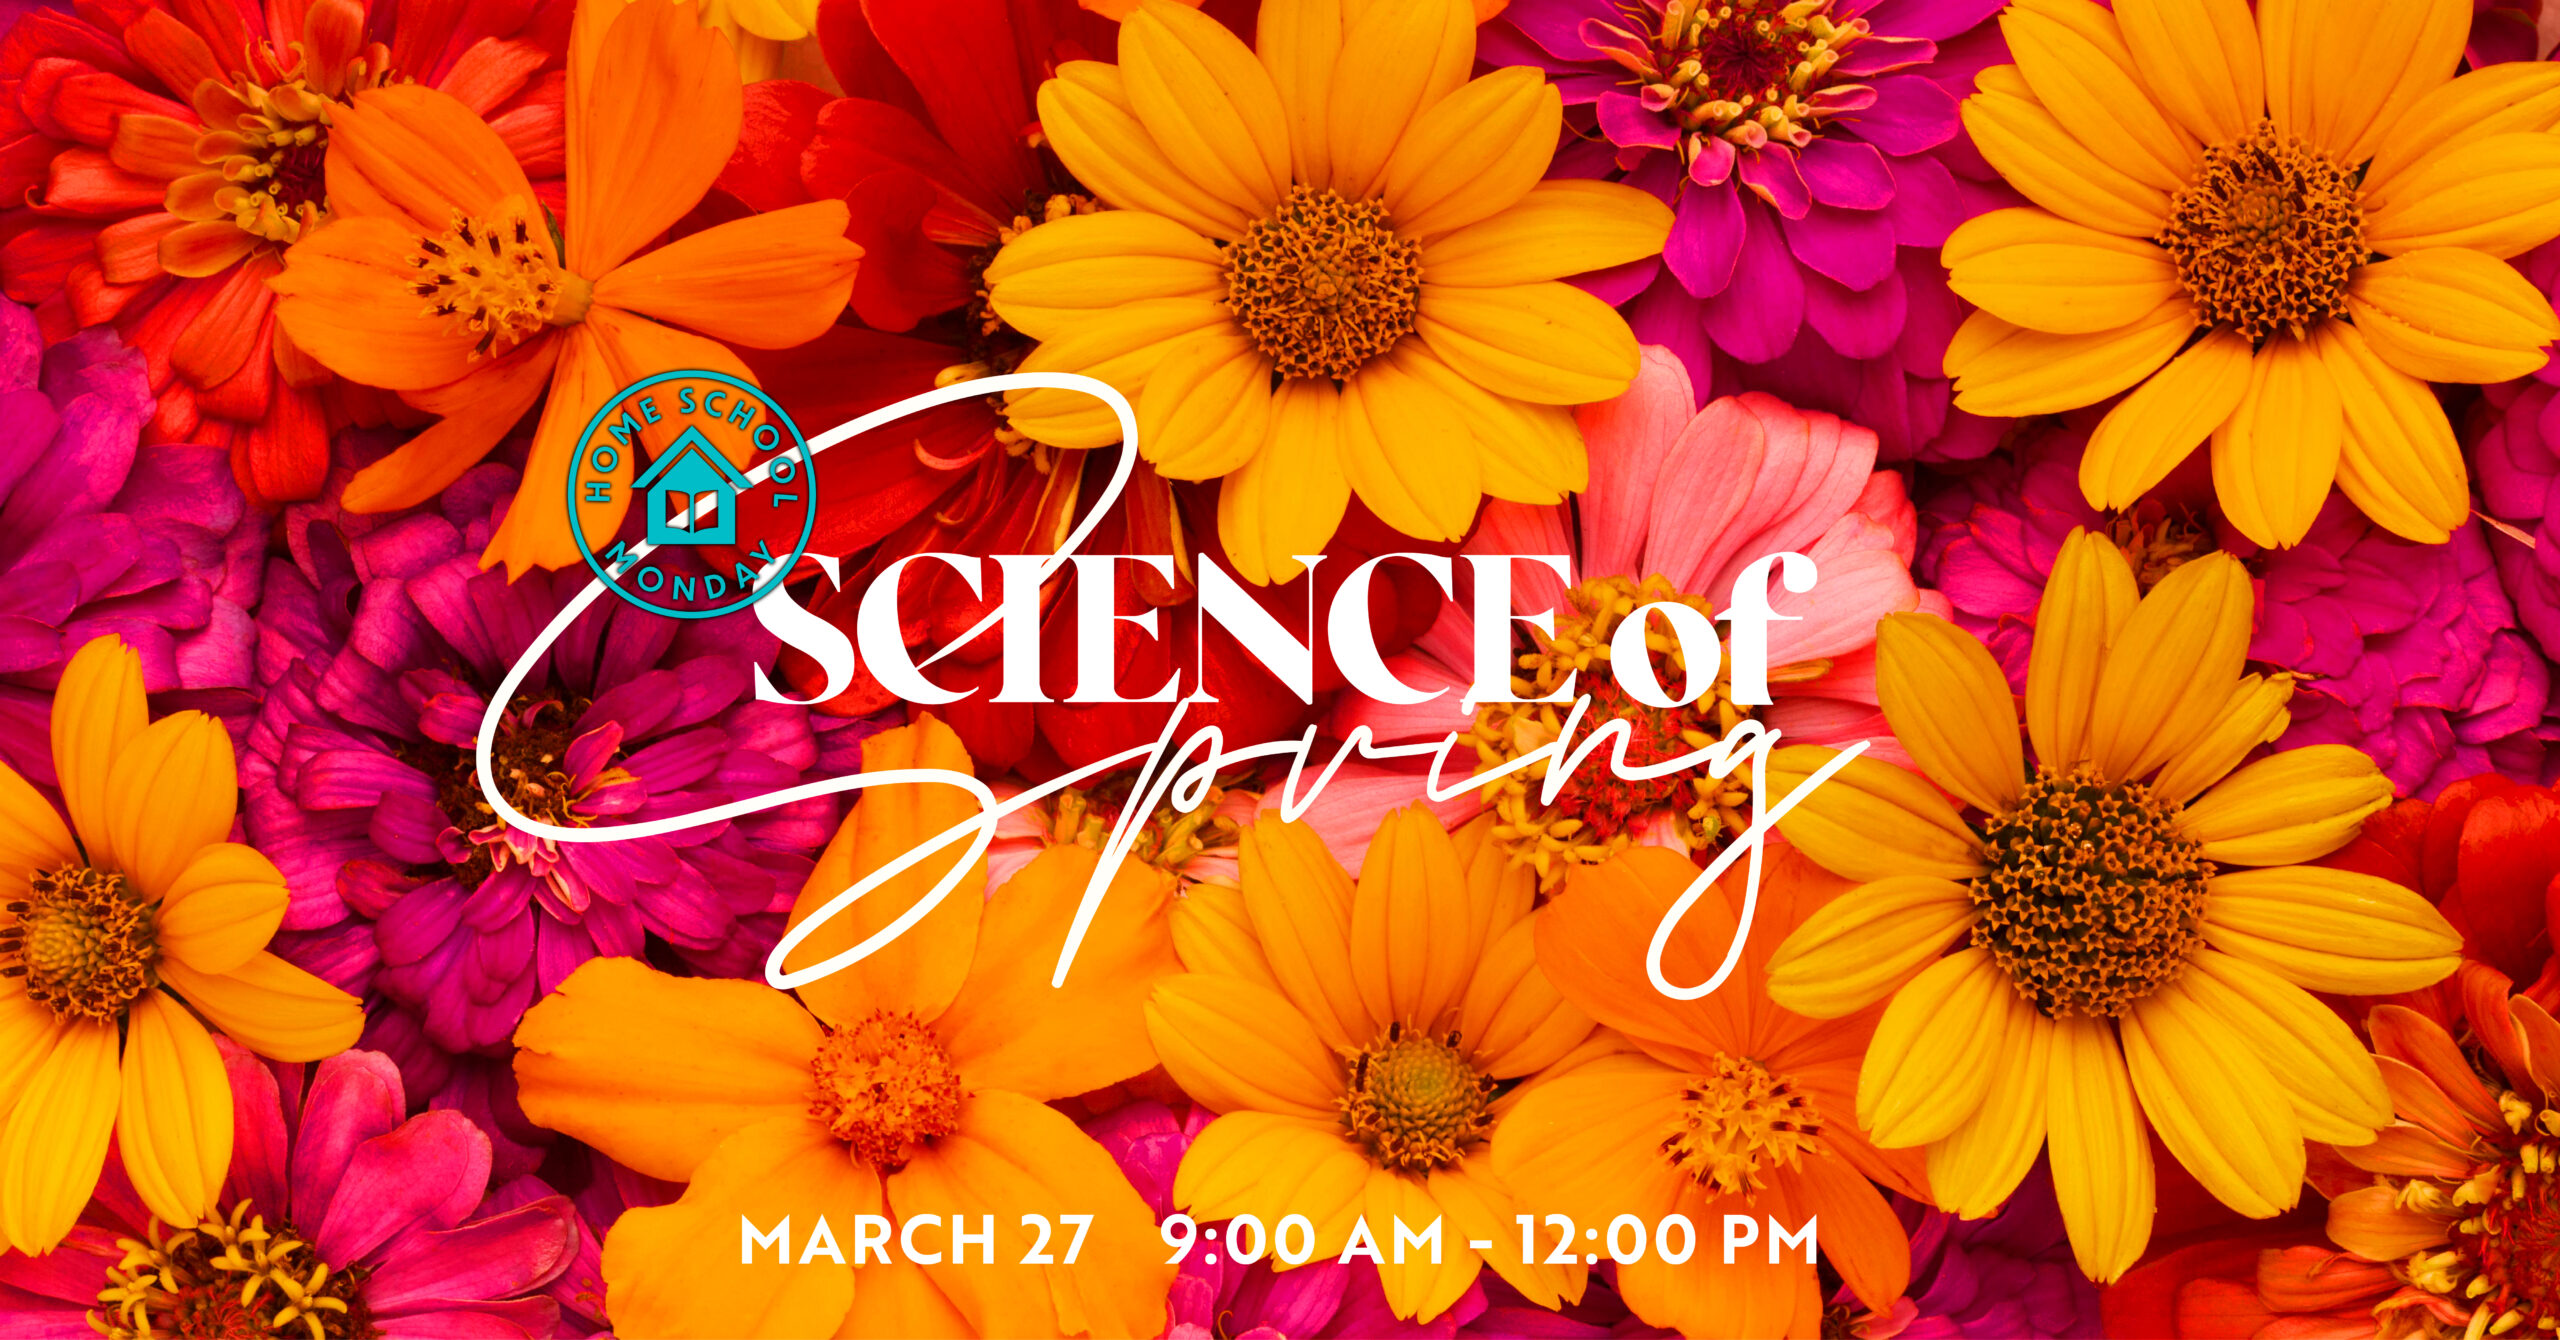 Science of spring 2019.